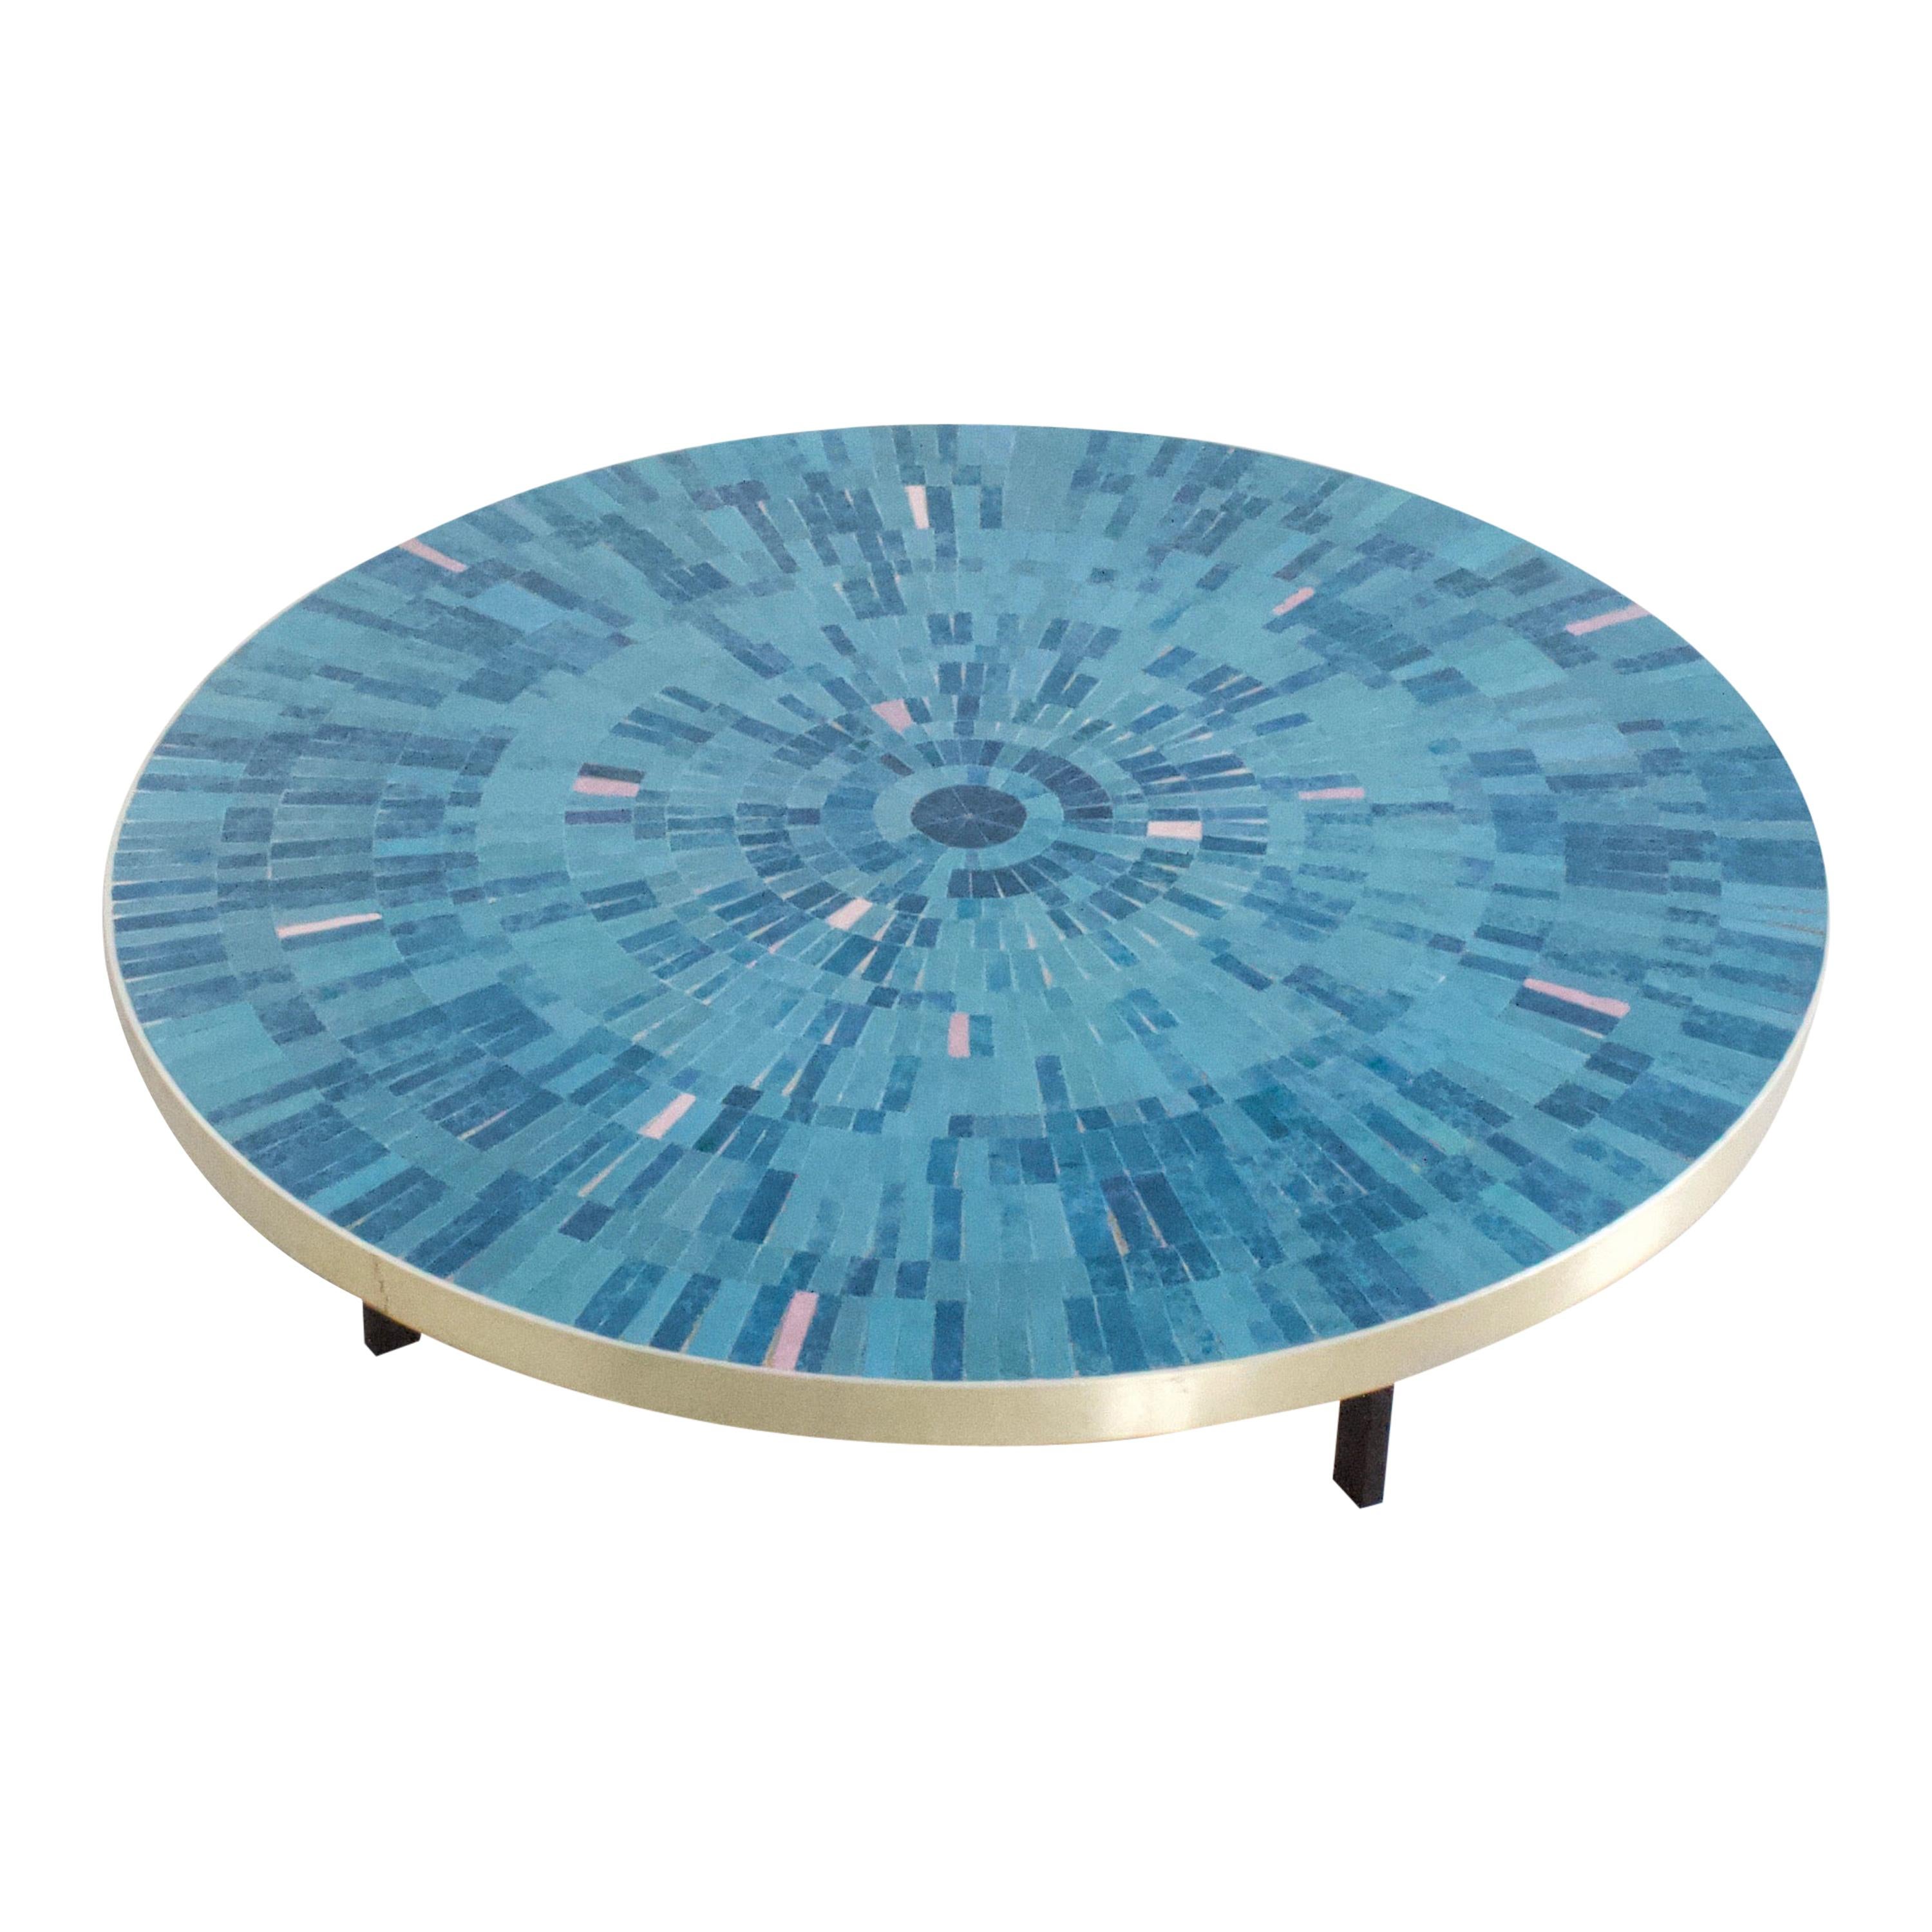 Impressive Round Mosaic Tile Coffee Table by Berthold Müller, 1960s